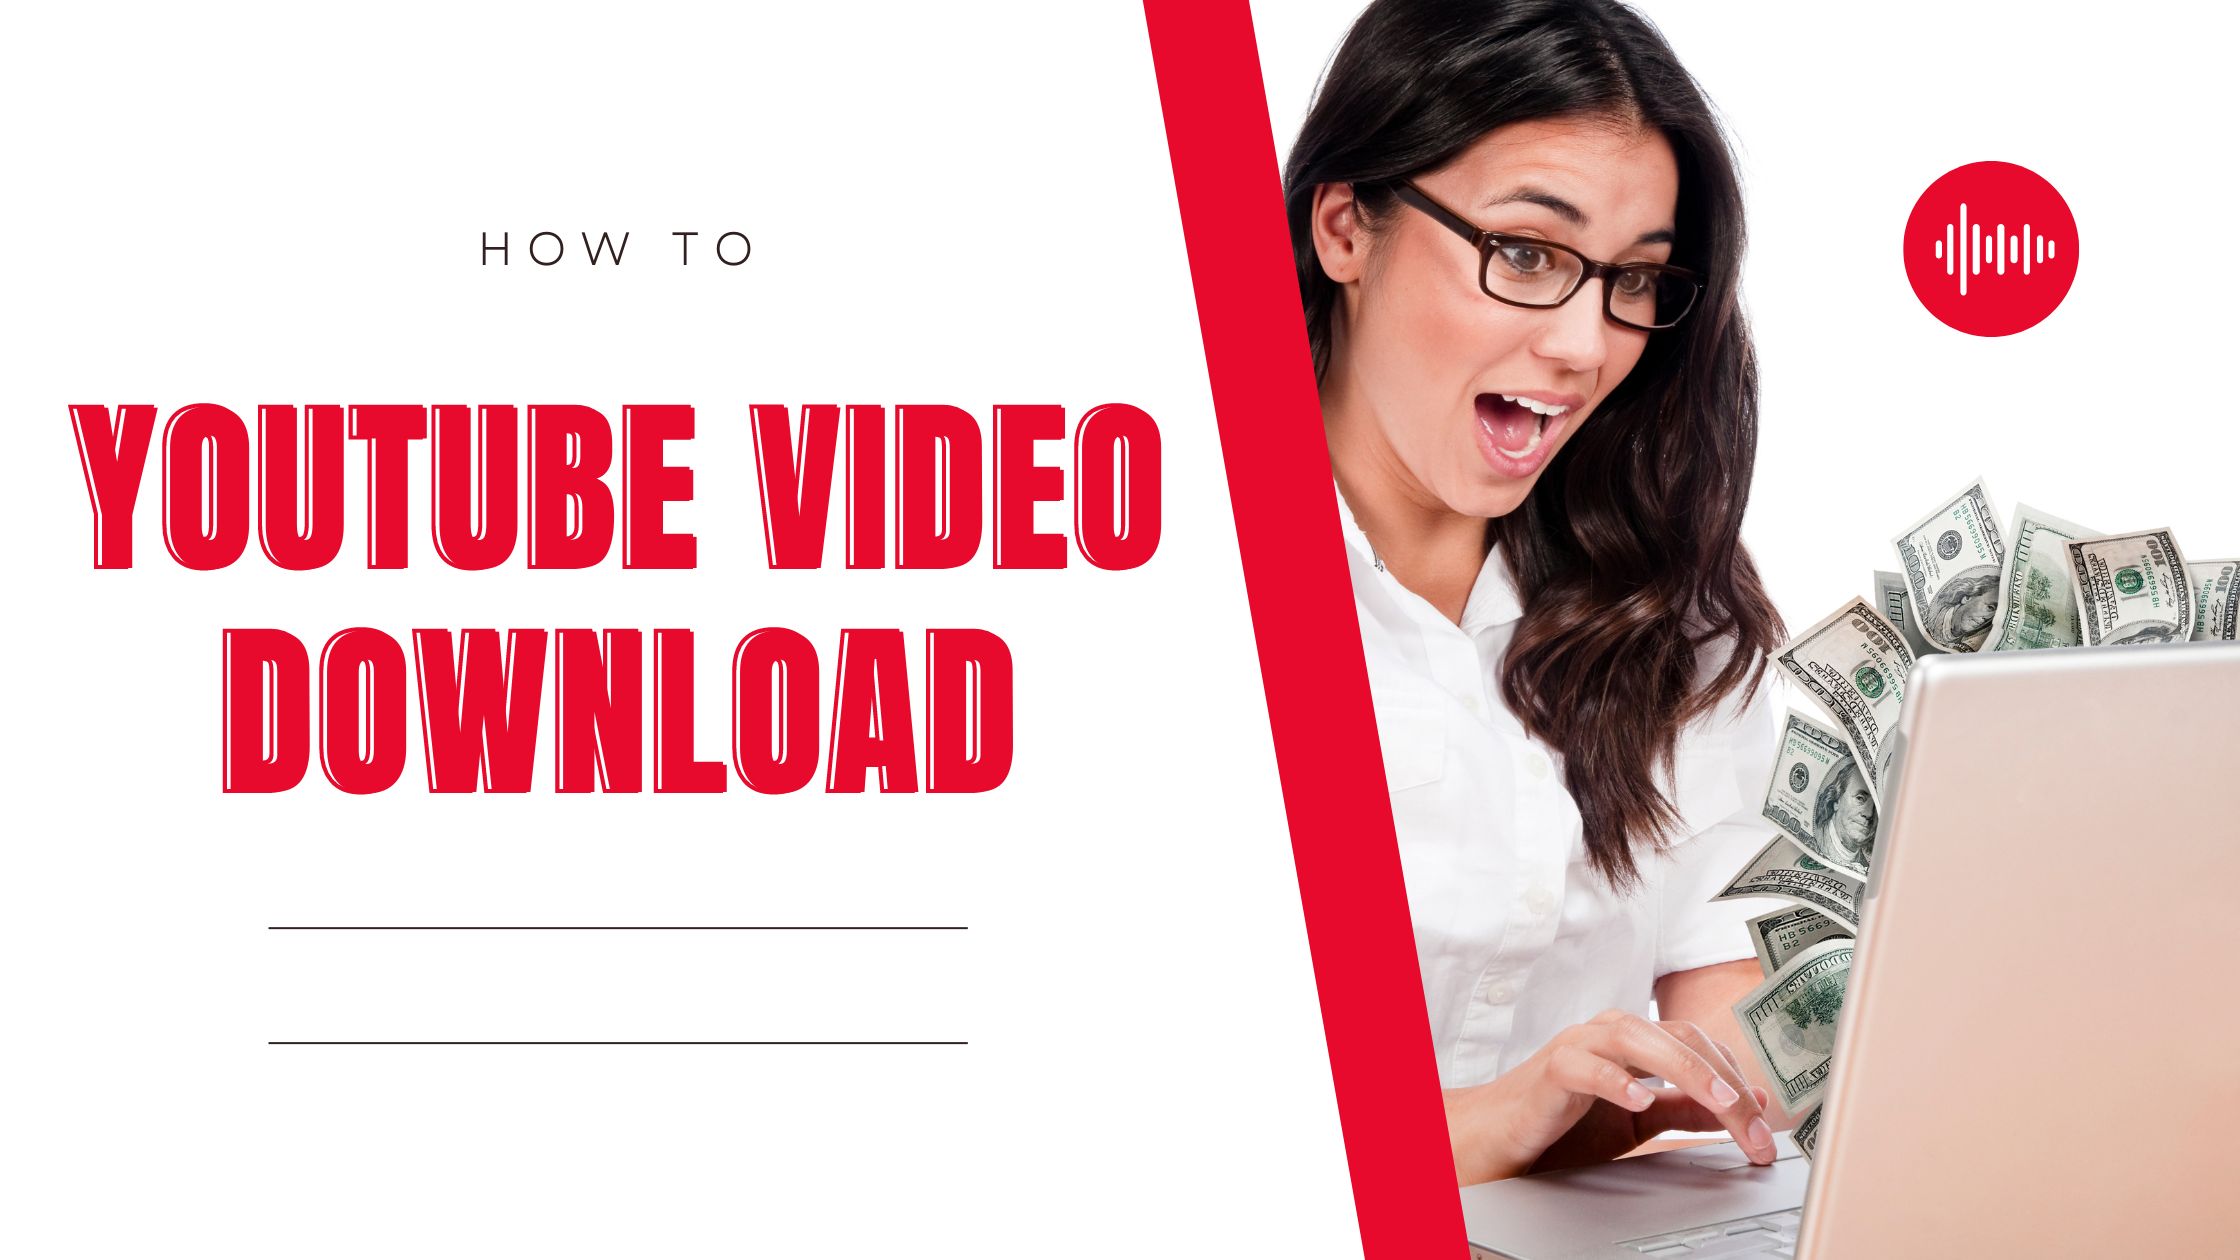 Top secret why youtube video download important?